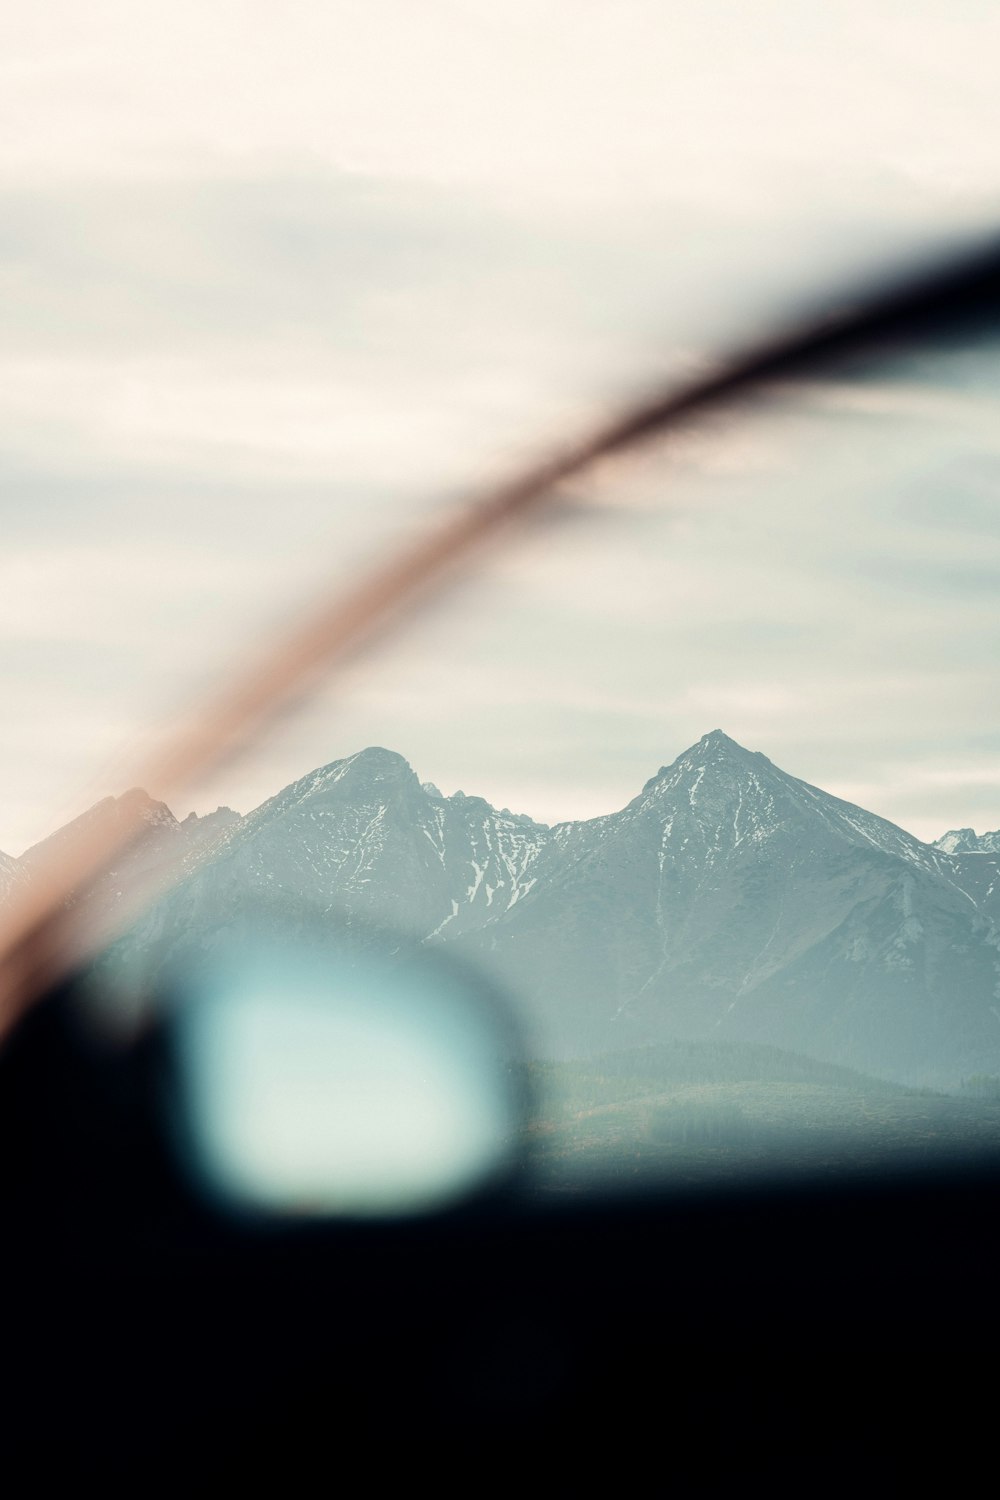 a view of a mountain range from inside a vehicle